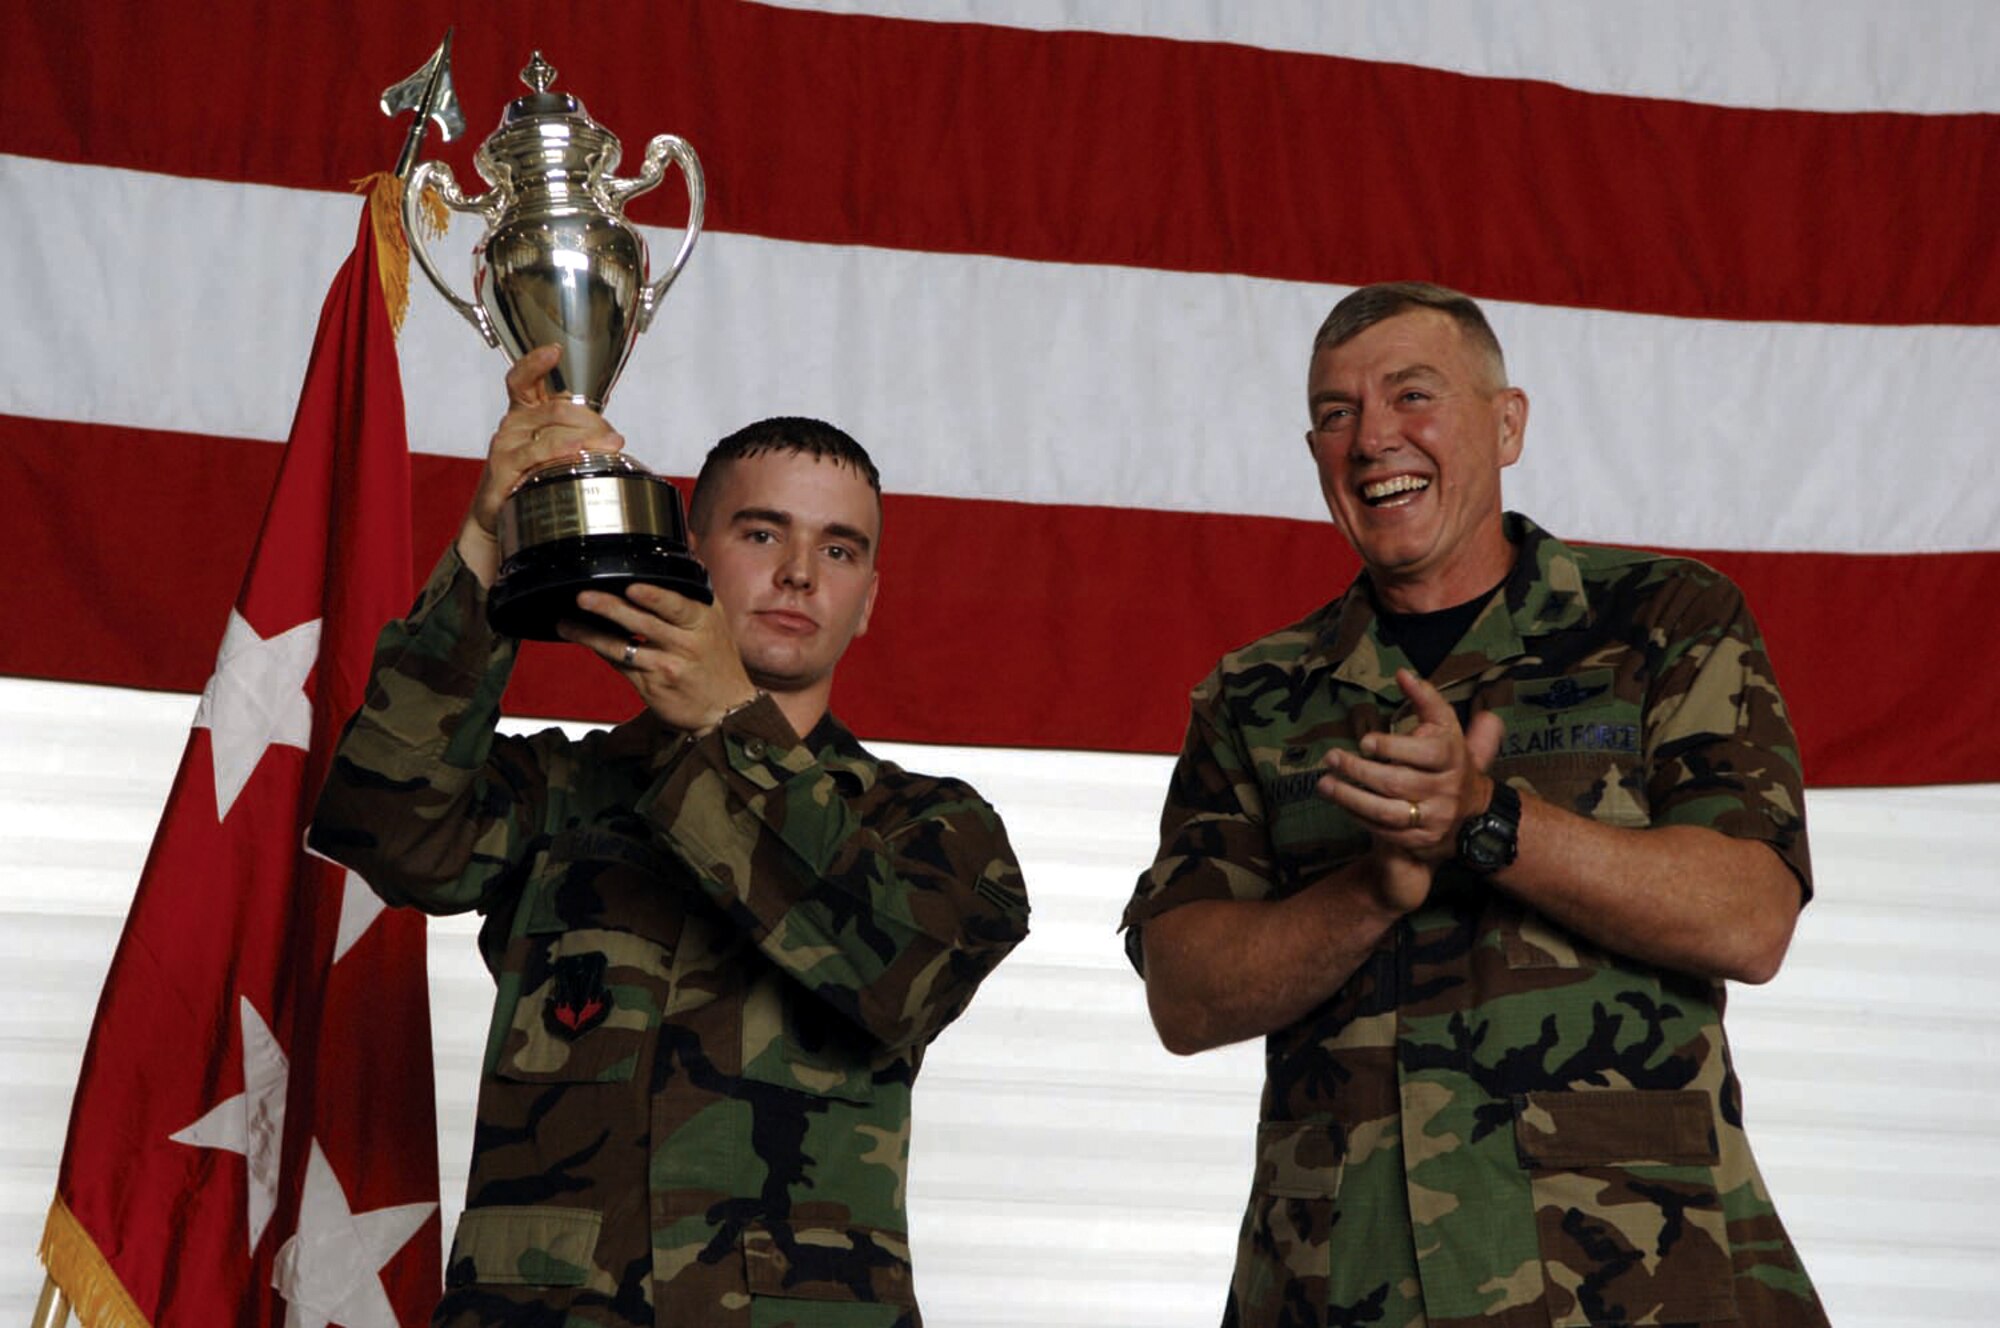 MINOT AIR FORCE BASE, N.D. -- Senior Airman Neil Campbell, 5th Security Forces Squadron, holds up the Omaha trophy with Col. Eldon Woodie, 5th Bomb Wing commander. The 5th Bomb Wing won the trophy for its strategic aircraft operations in 2005. (U.S. Air Force photo by Airman 1st Class Christopher Boitz)